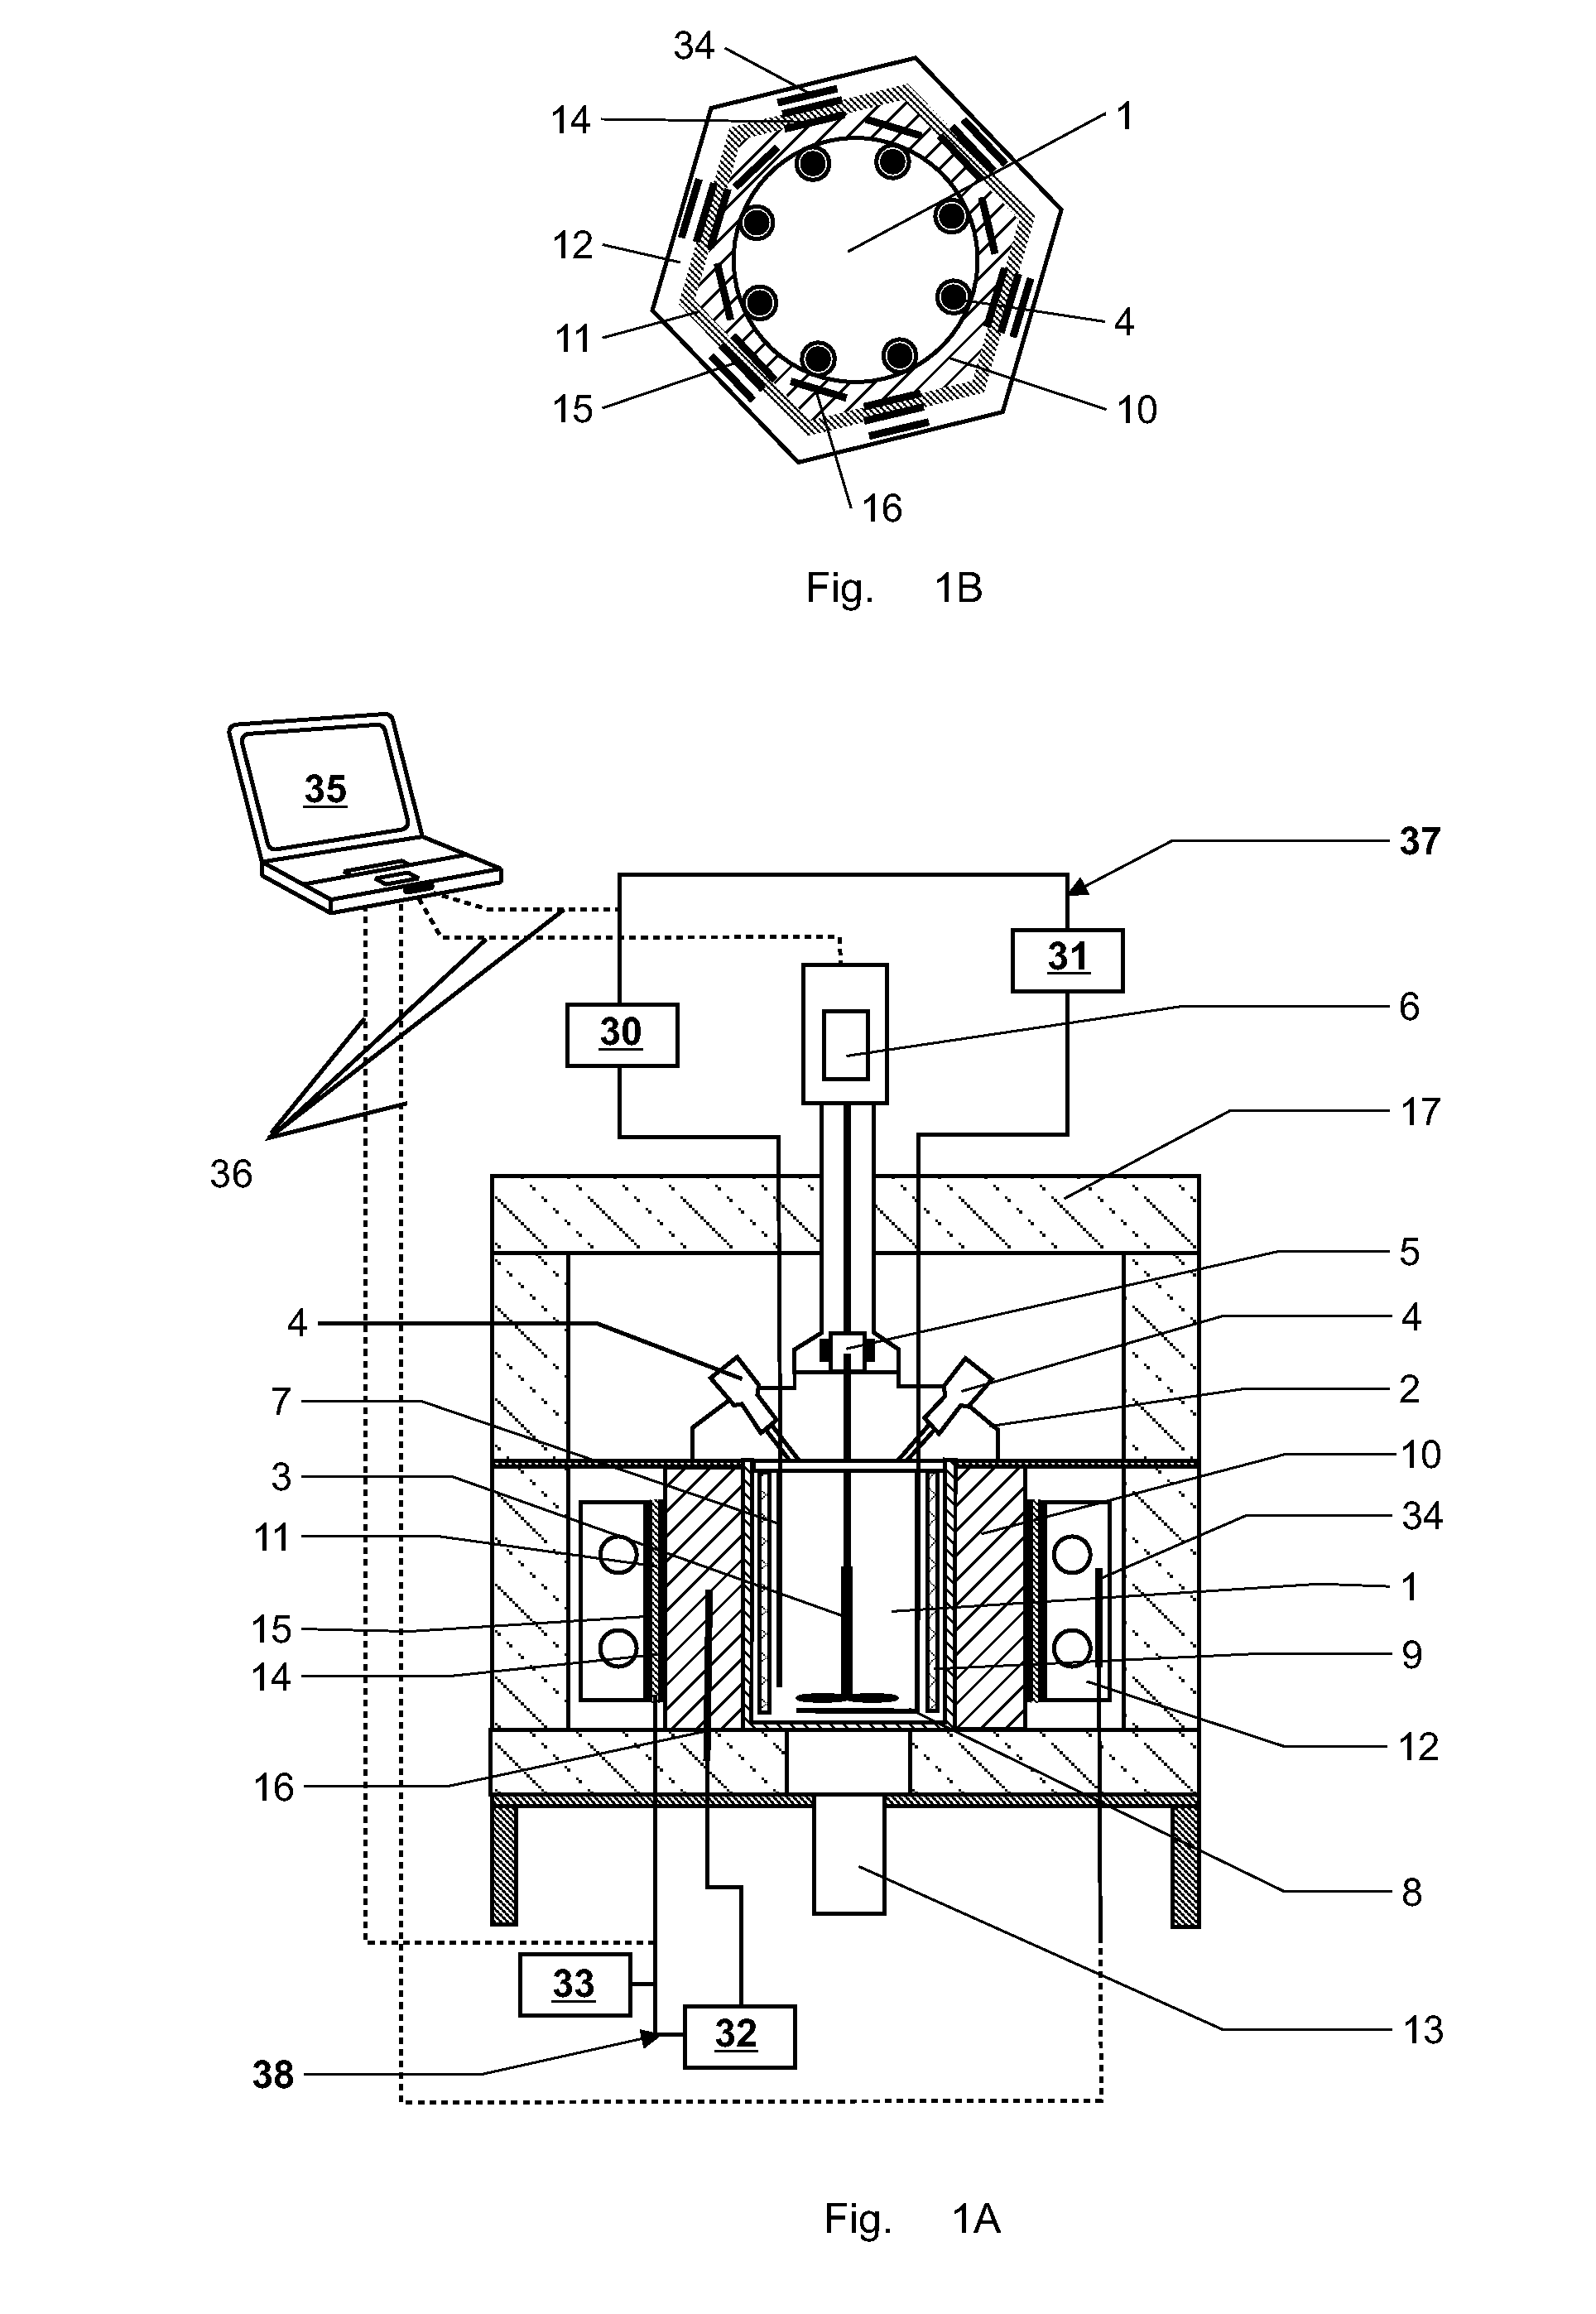 Method and device for determining specific heat capacity